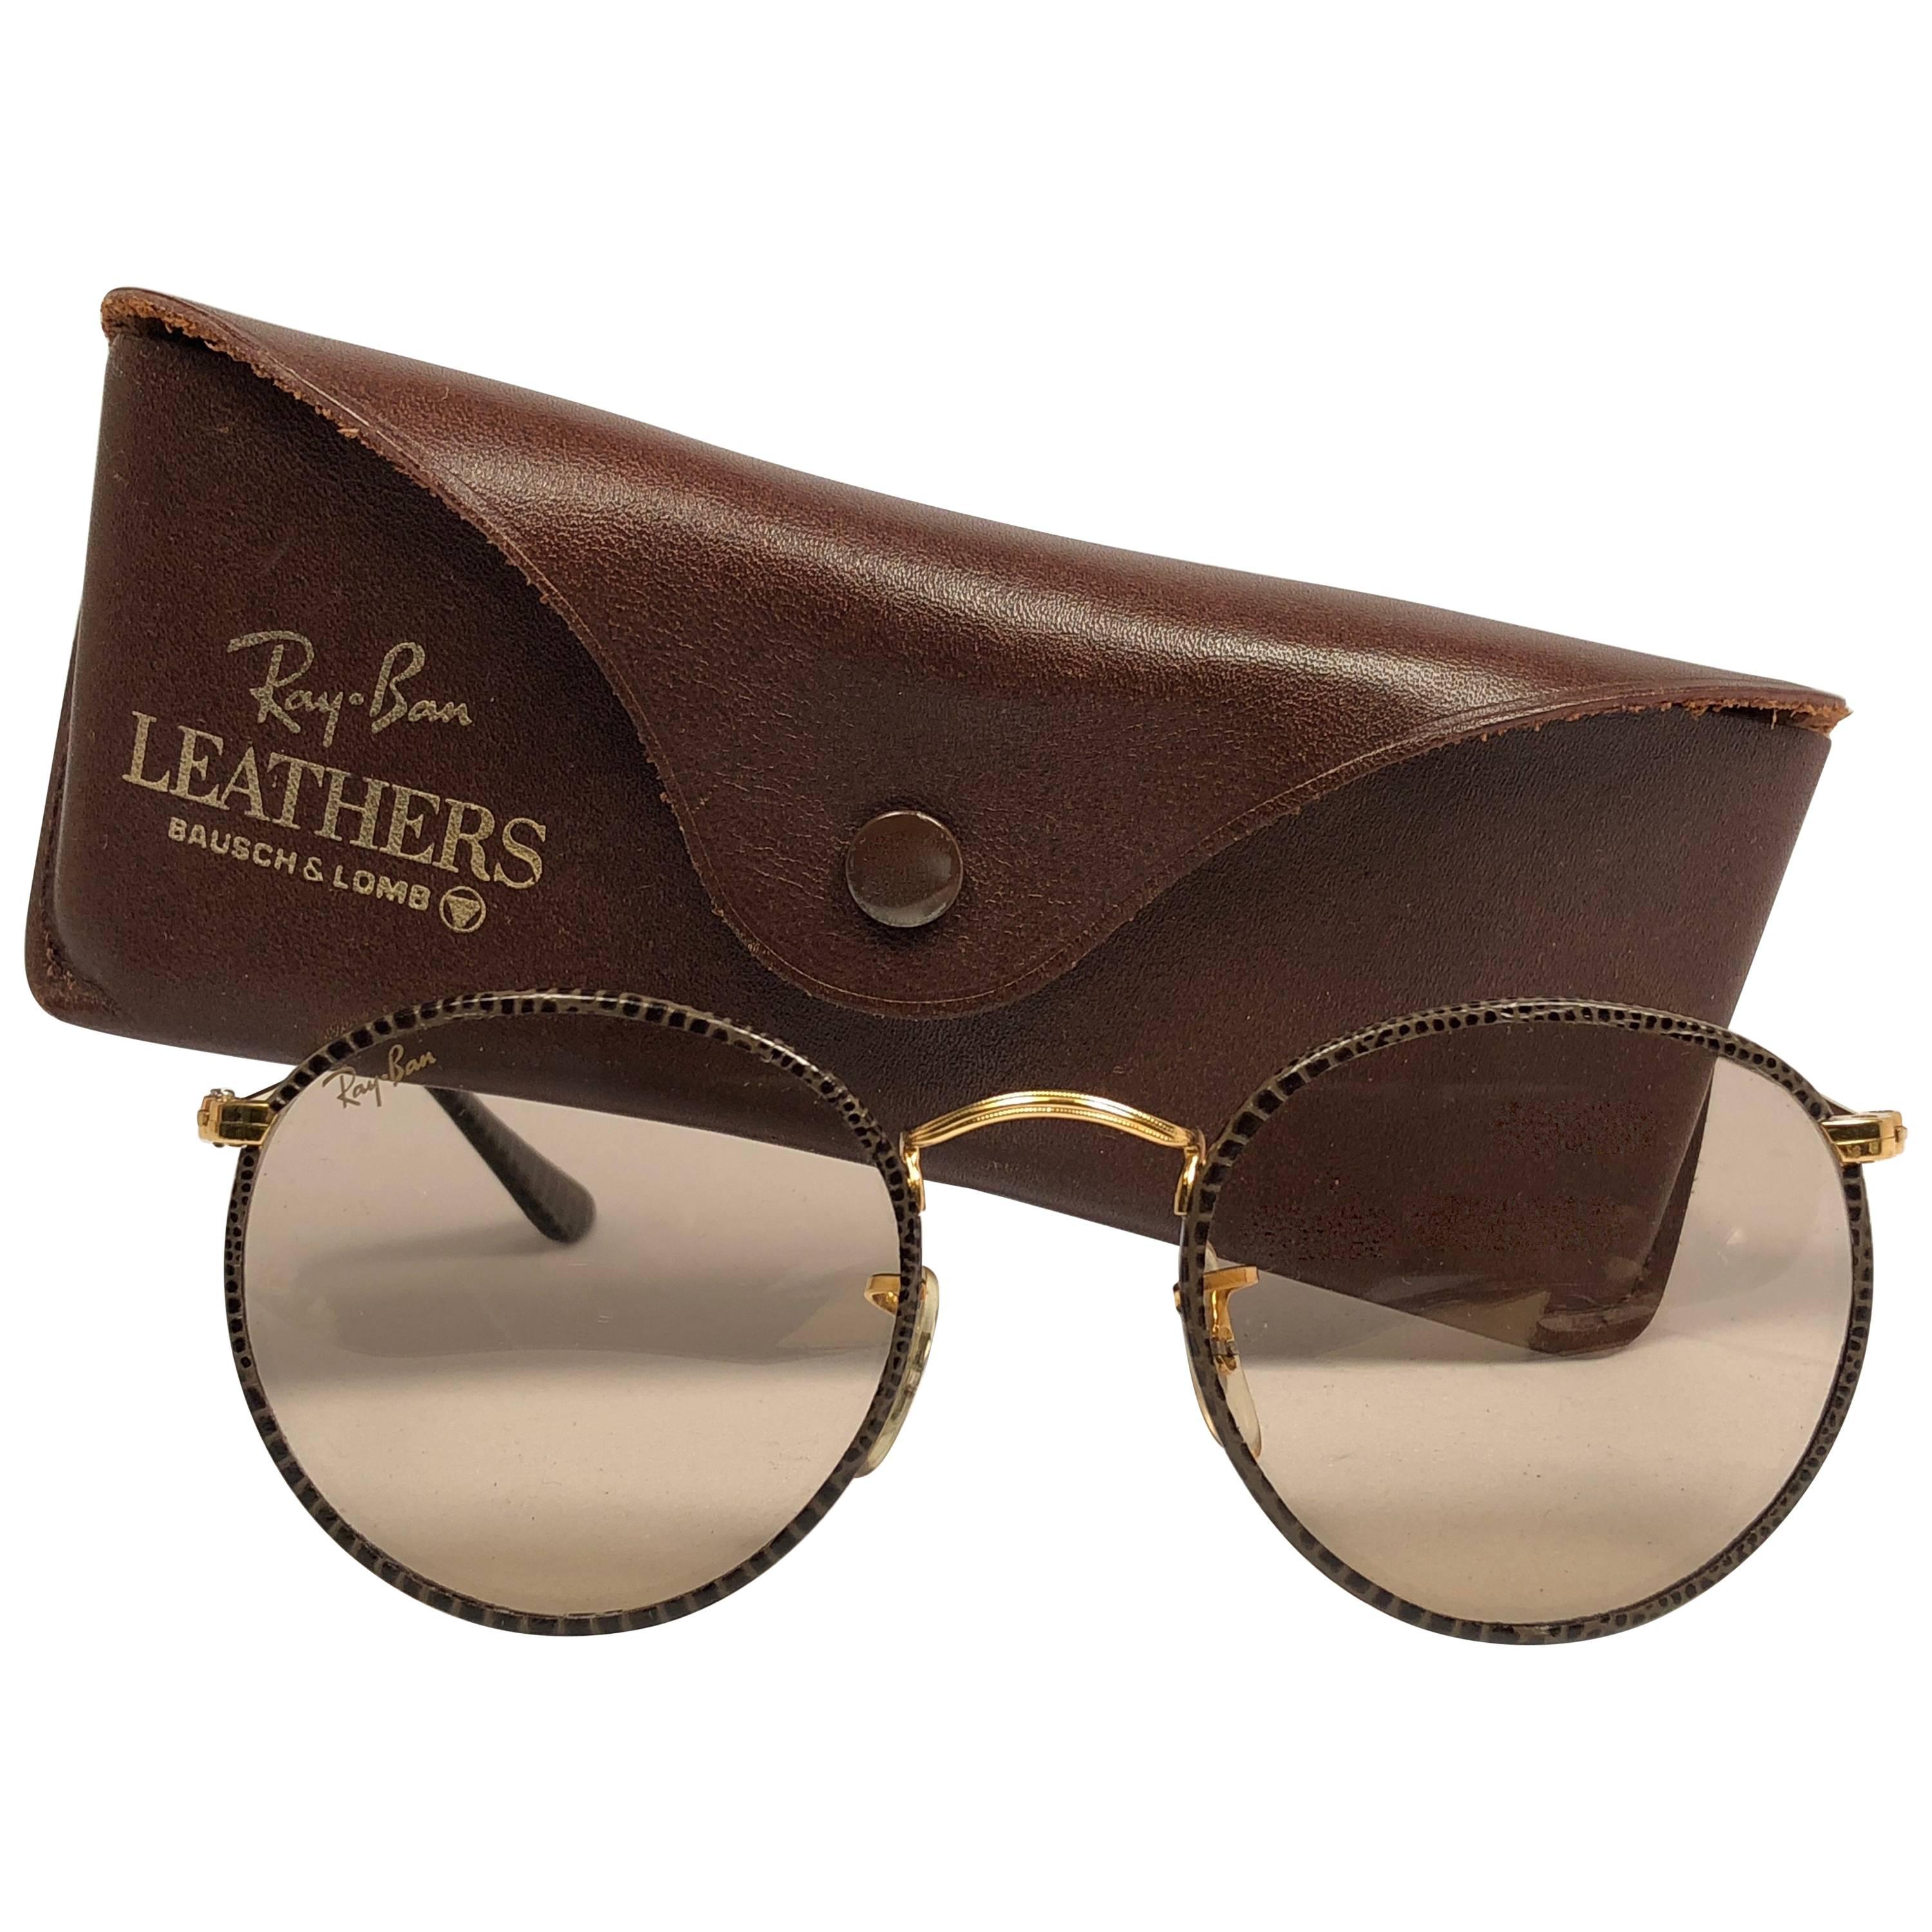 Ray Ban Vintage Leathers Brown Round B&L Sunglasses, 1980s 